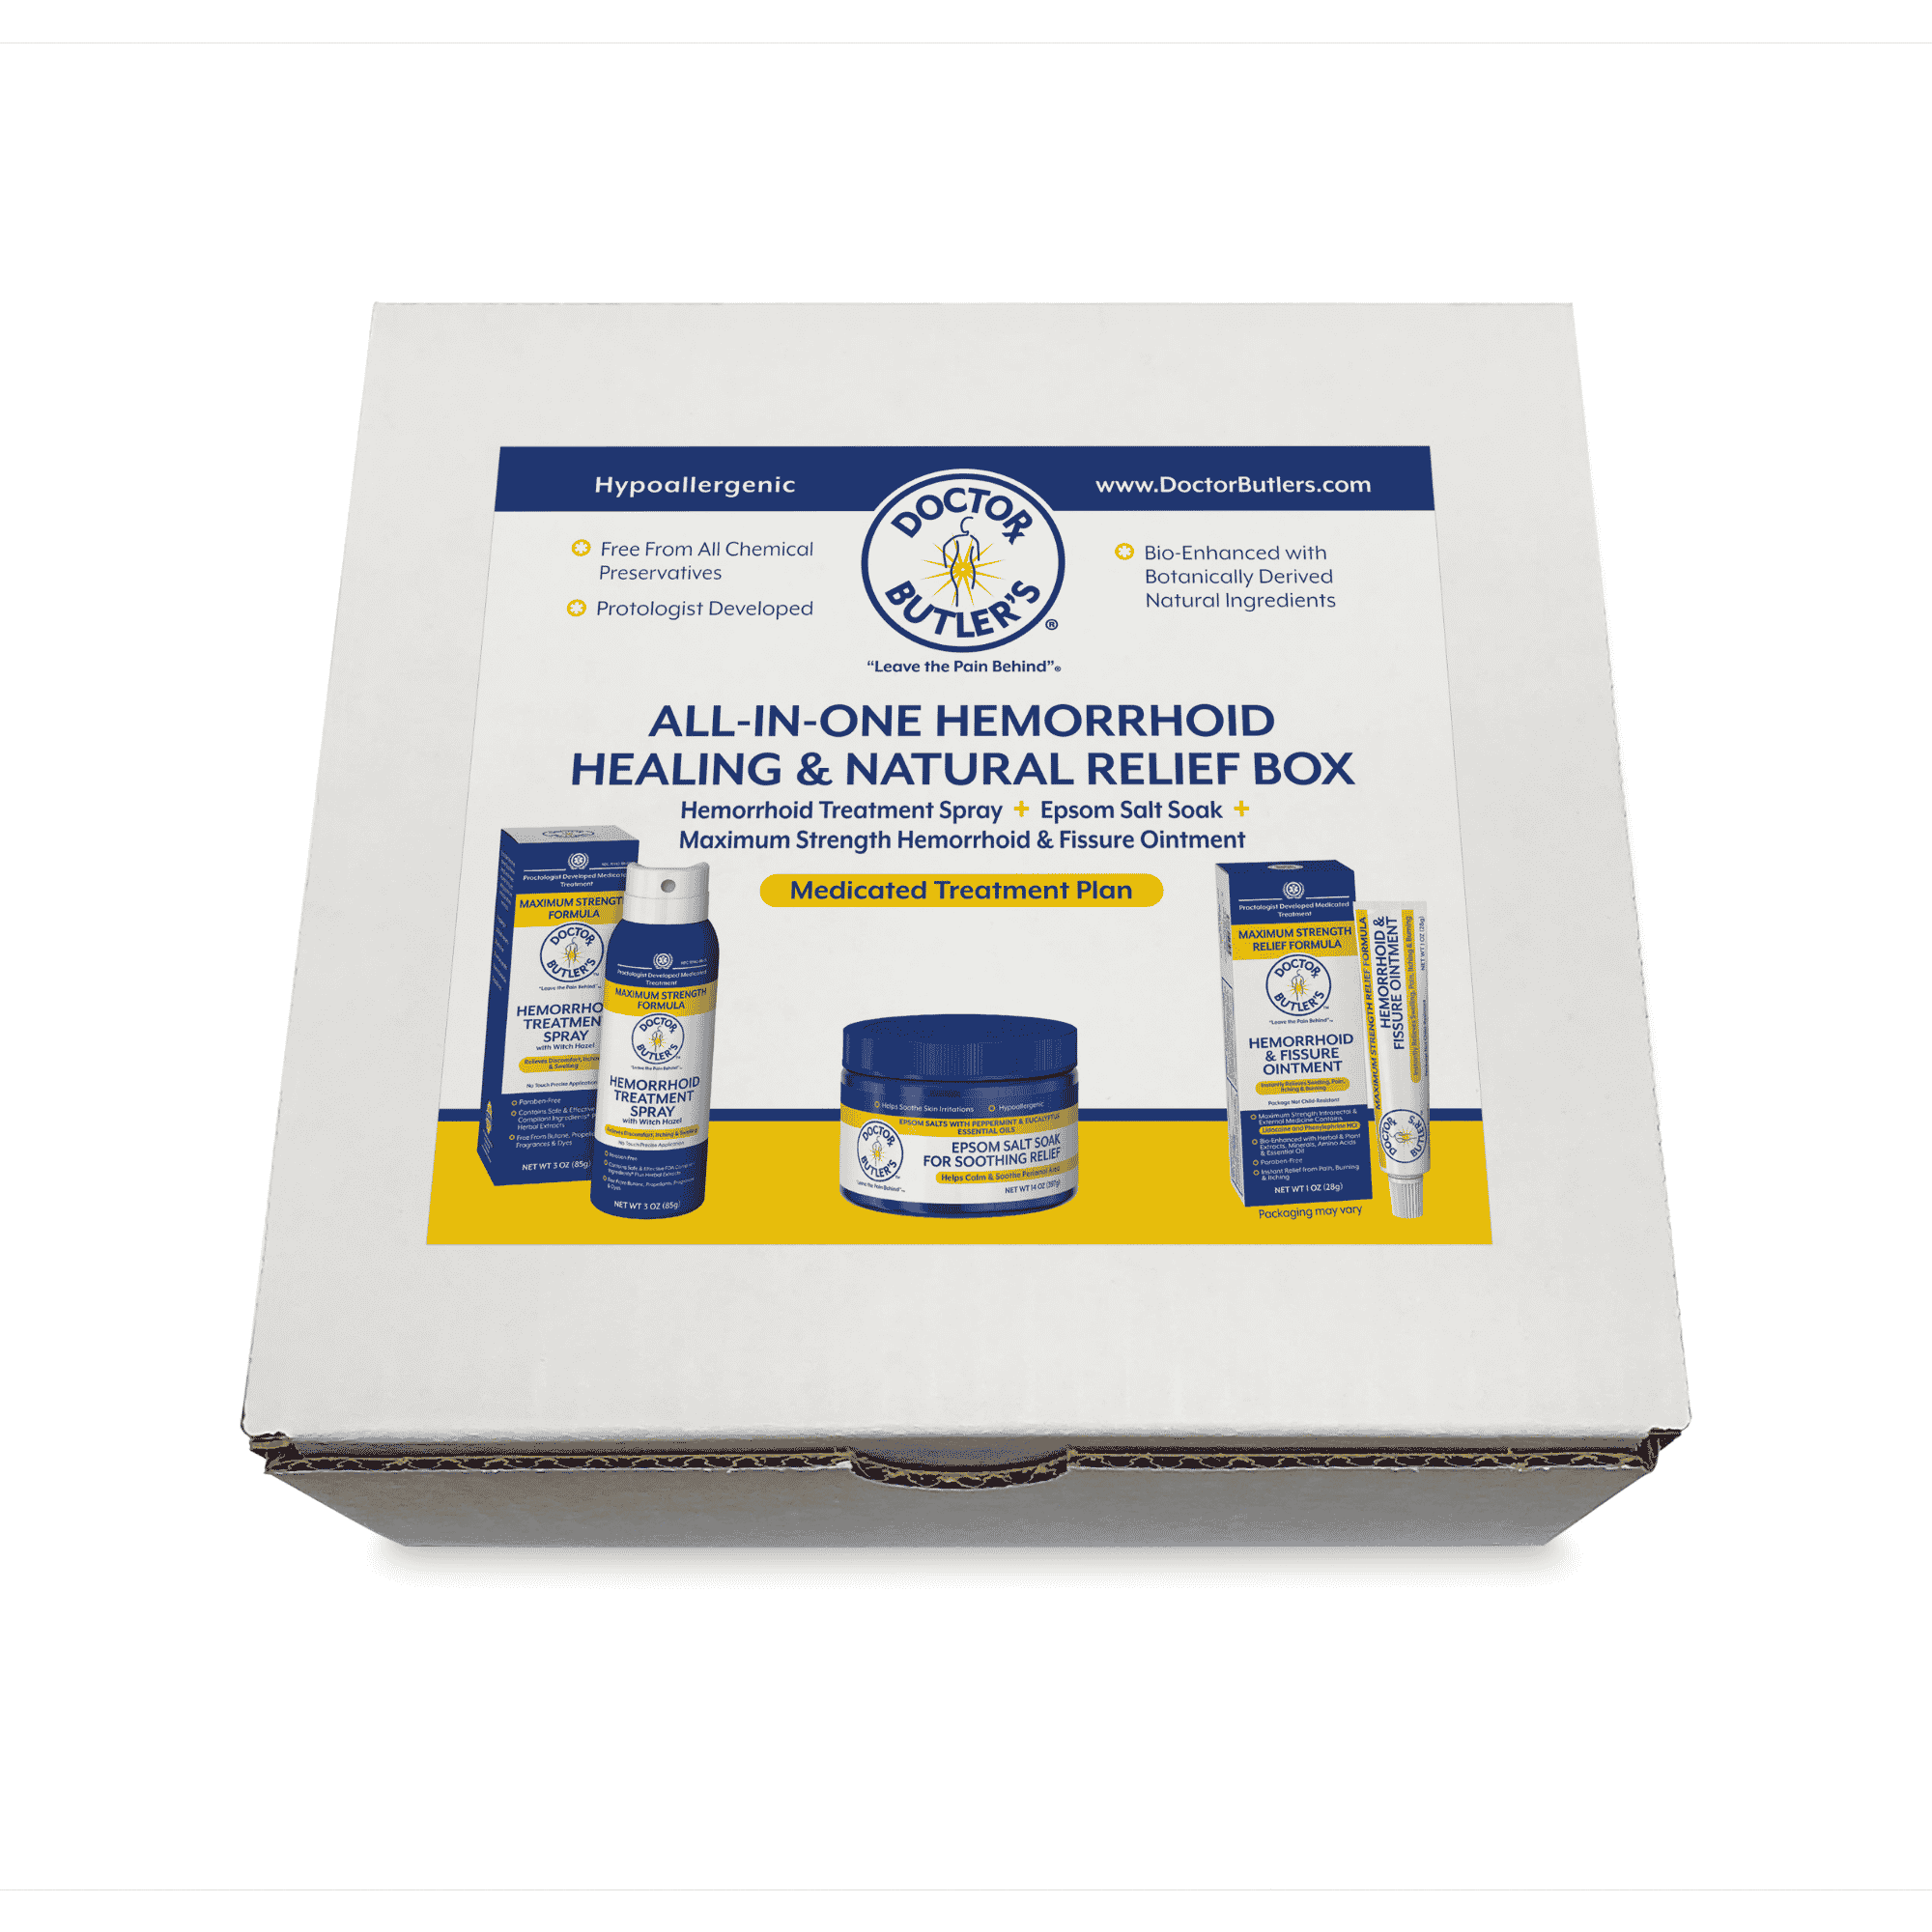 All-In-One Hemorrhoid Healing & Natural Relief Box